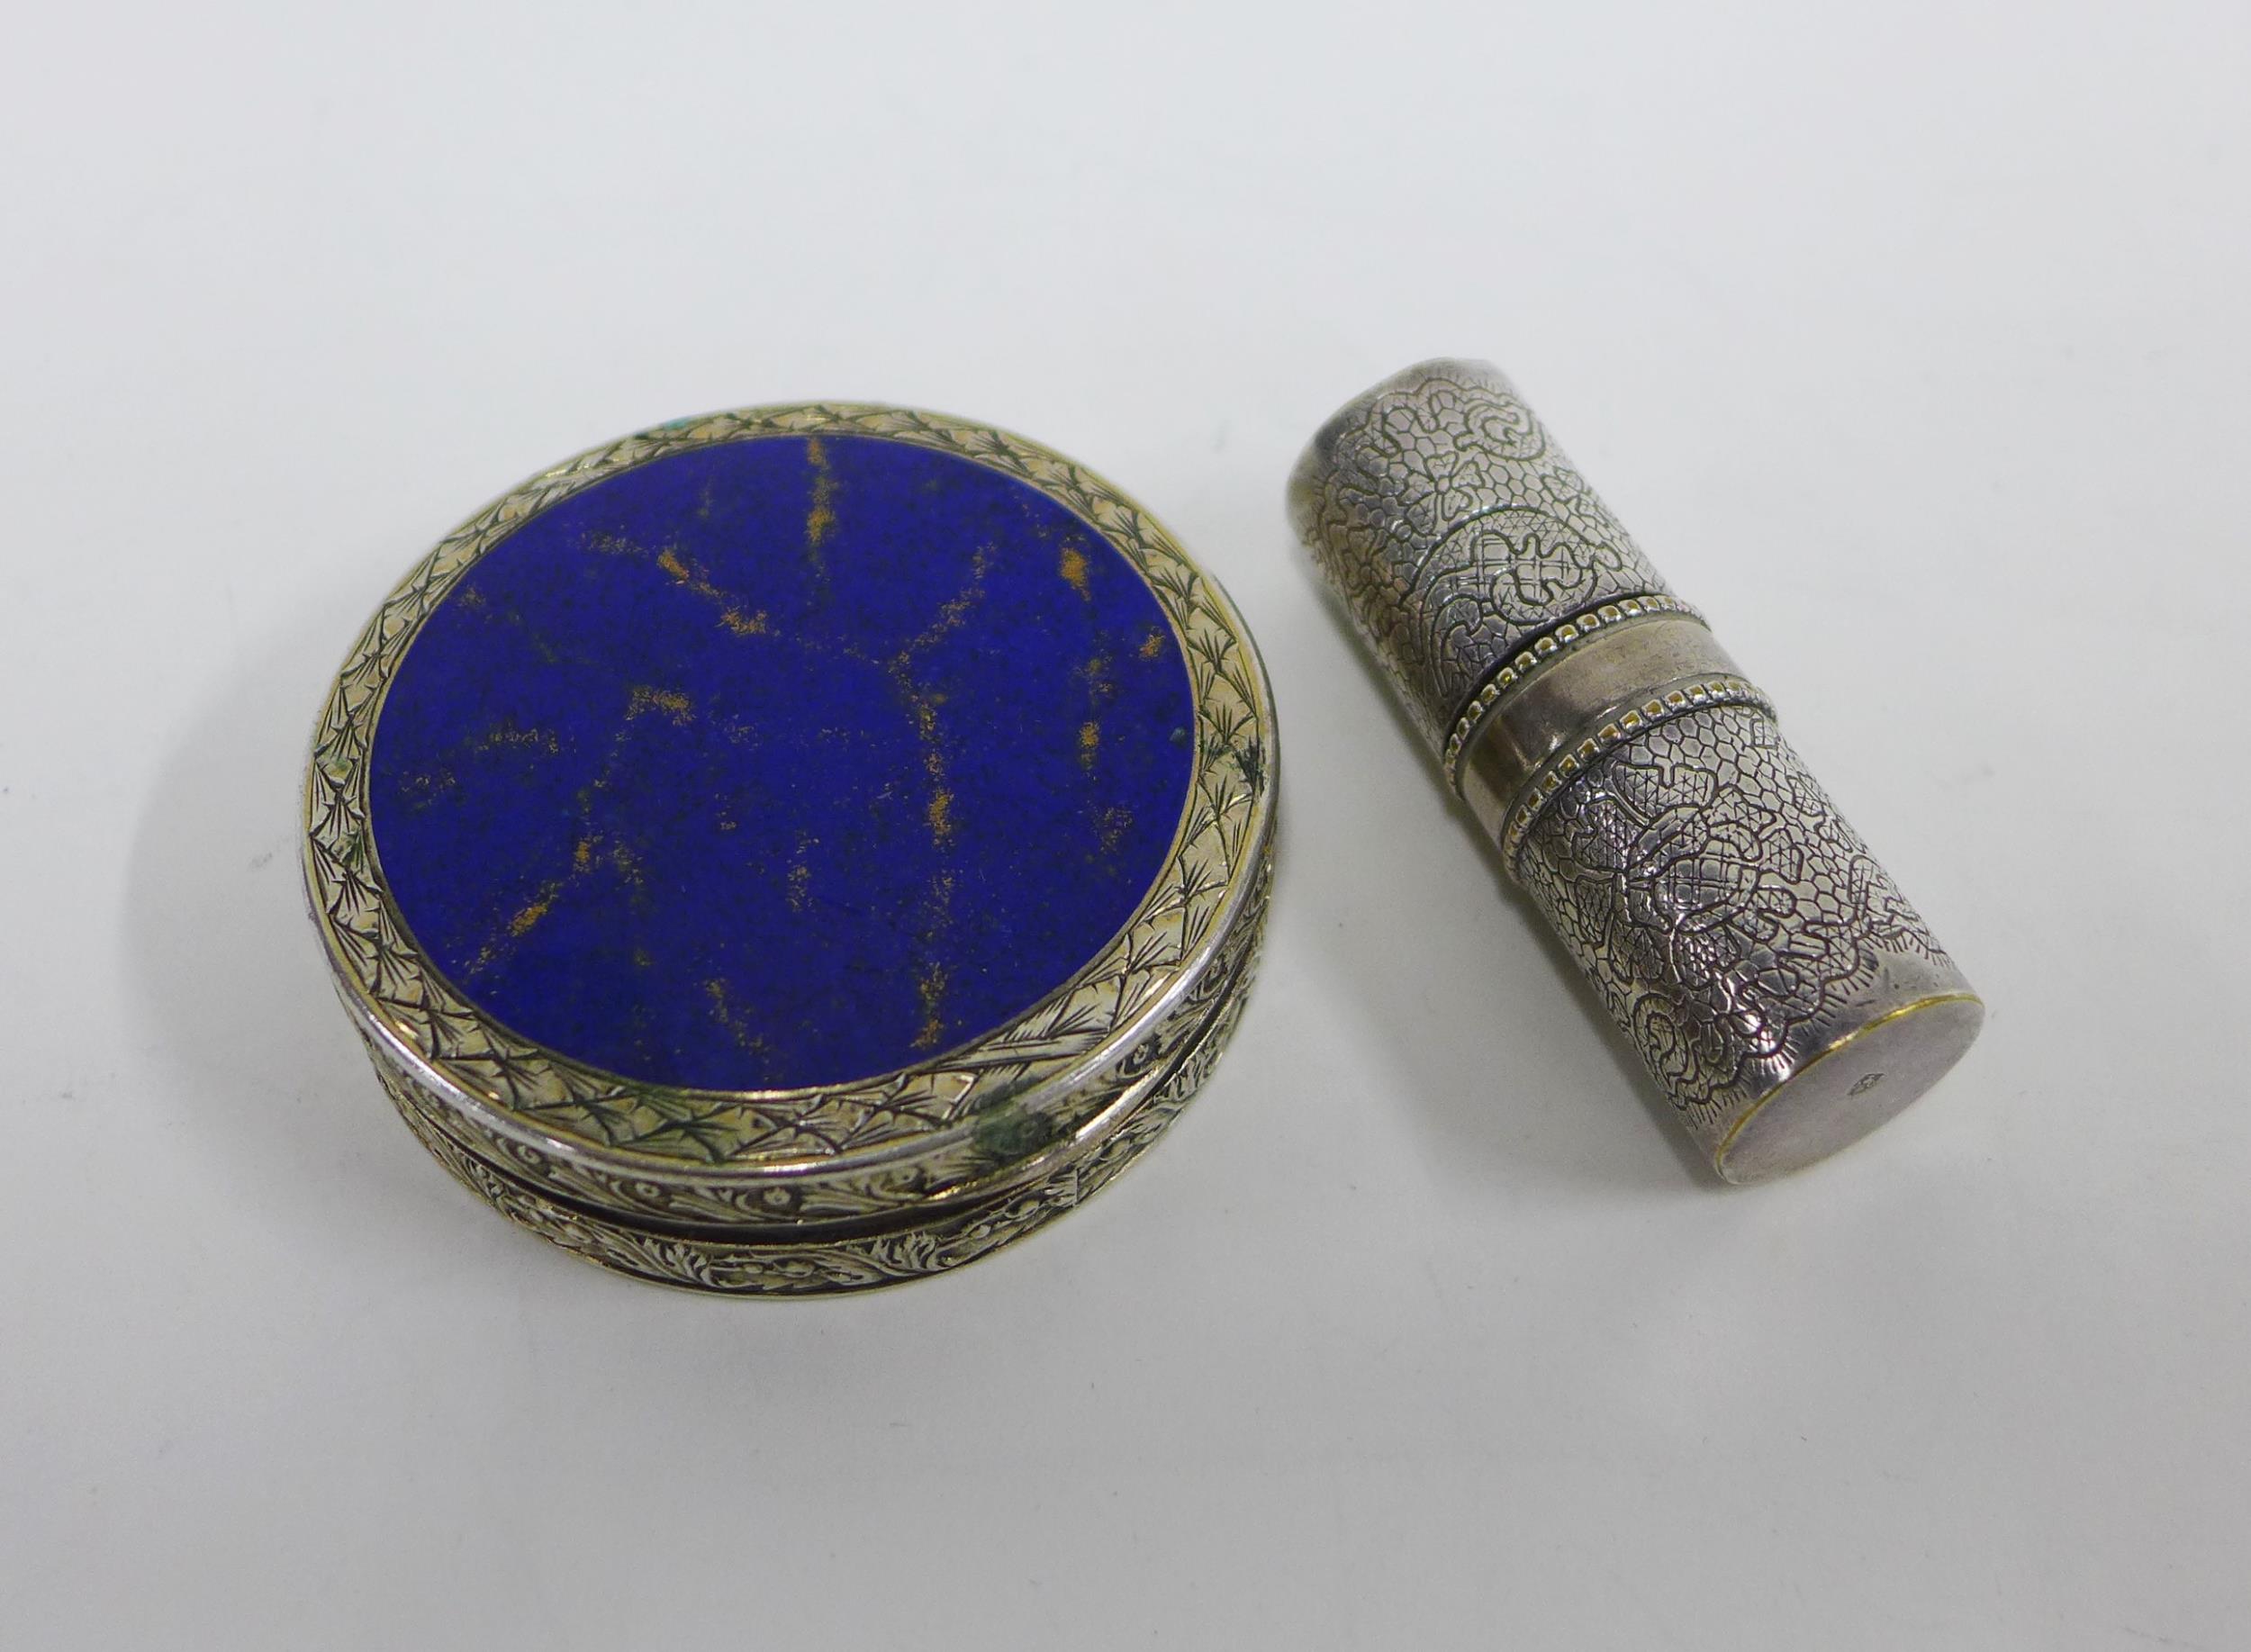 1950s Marcel Rochas of Paris silver lipstick compact and a German silver powder compact with a lapis